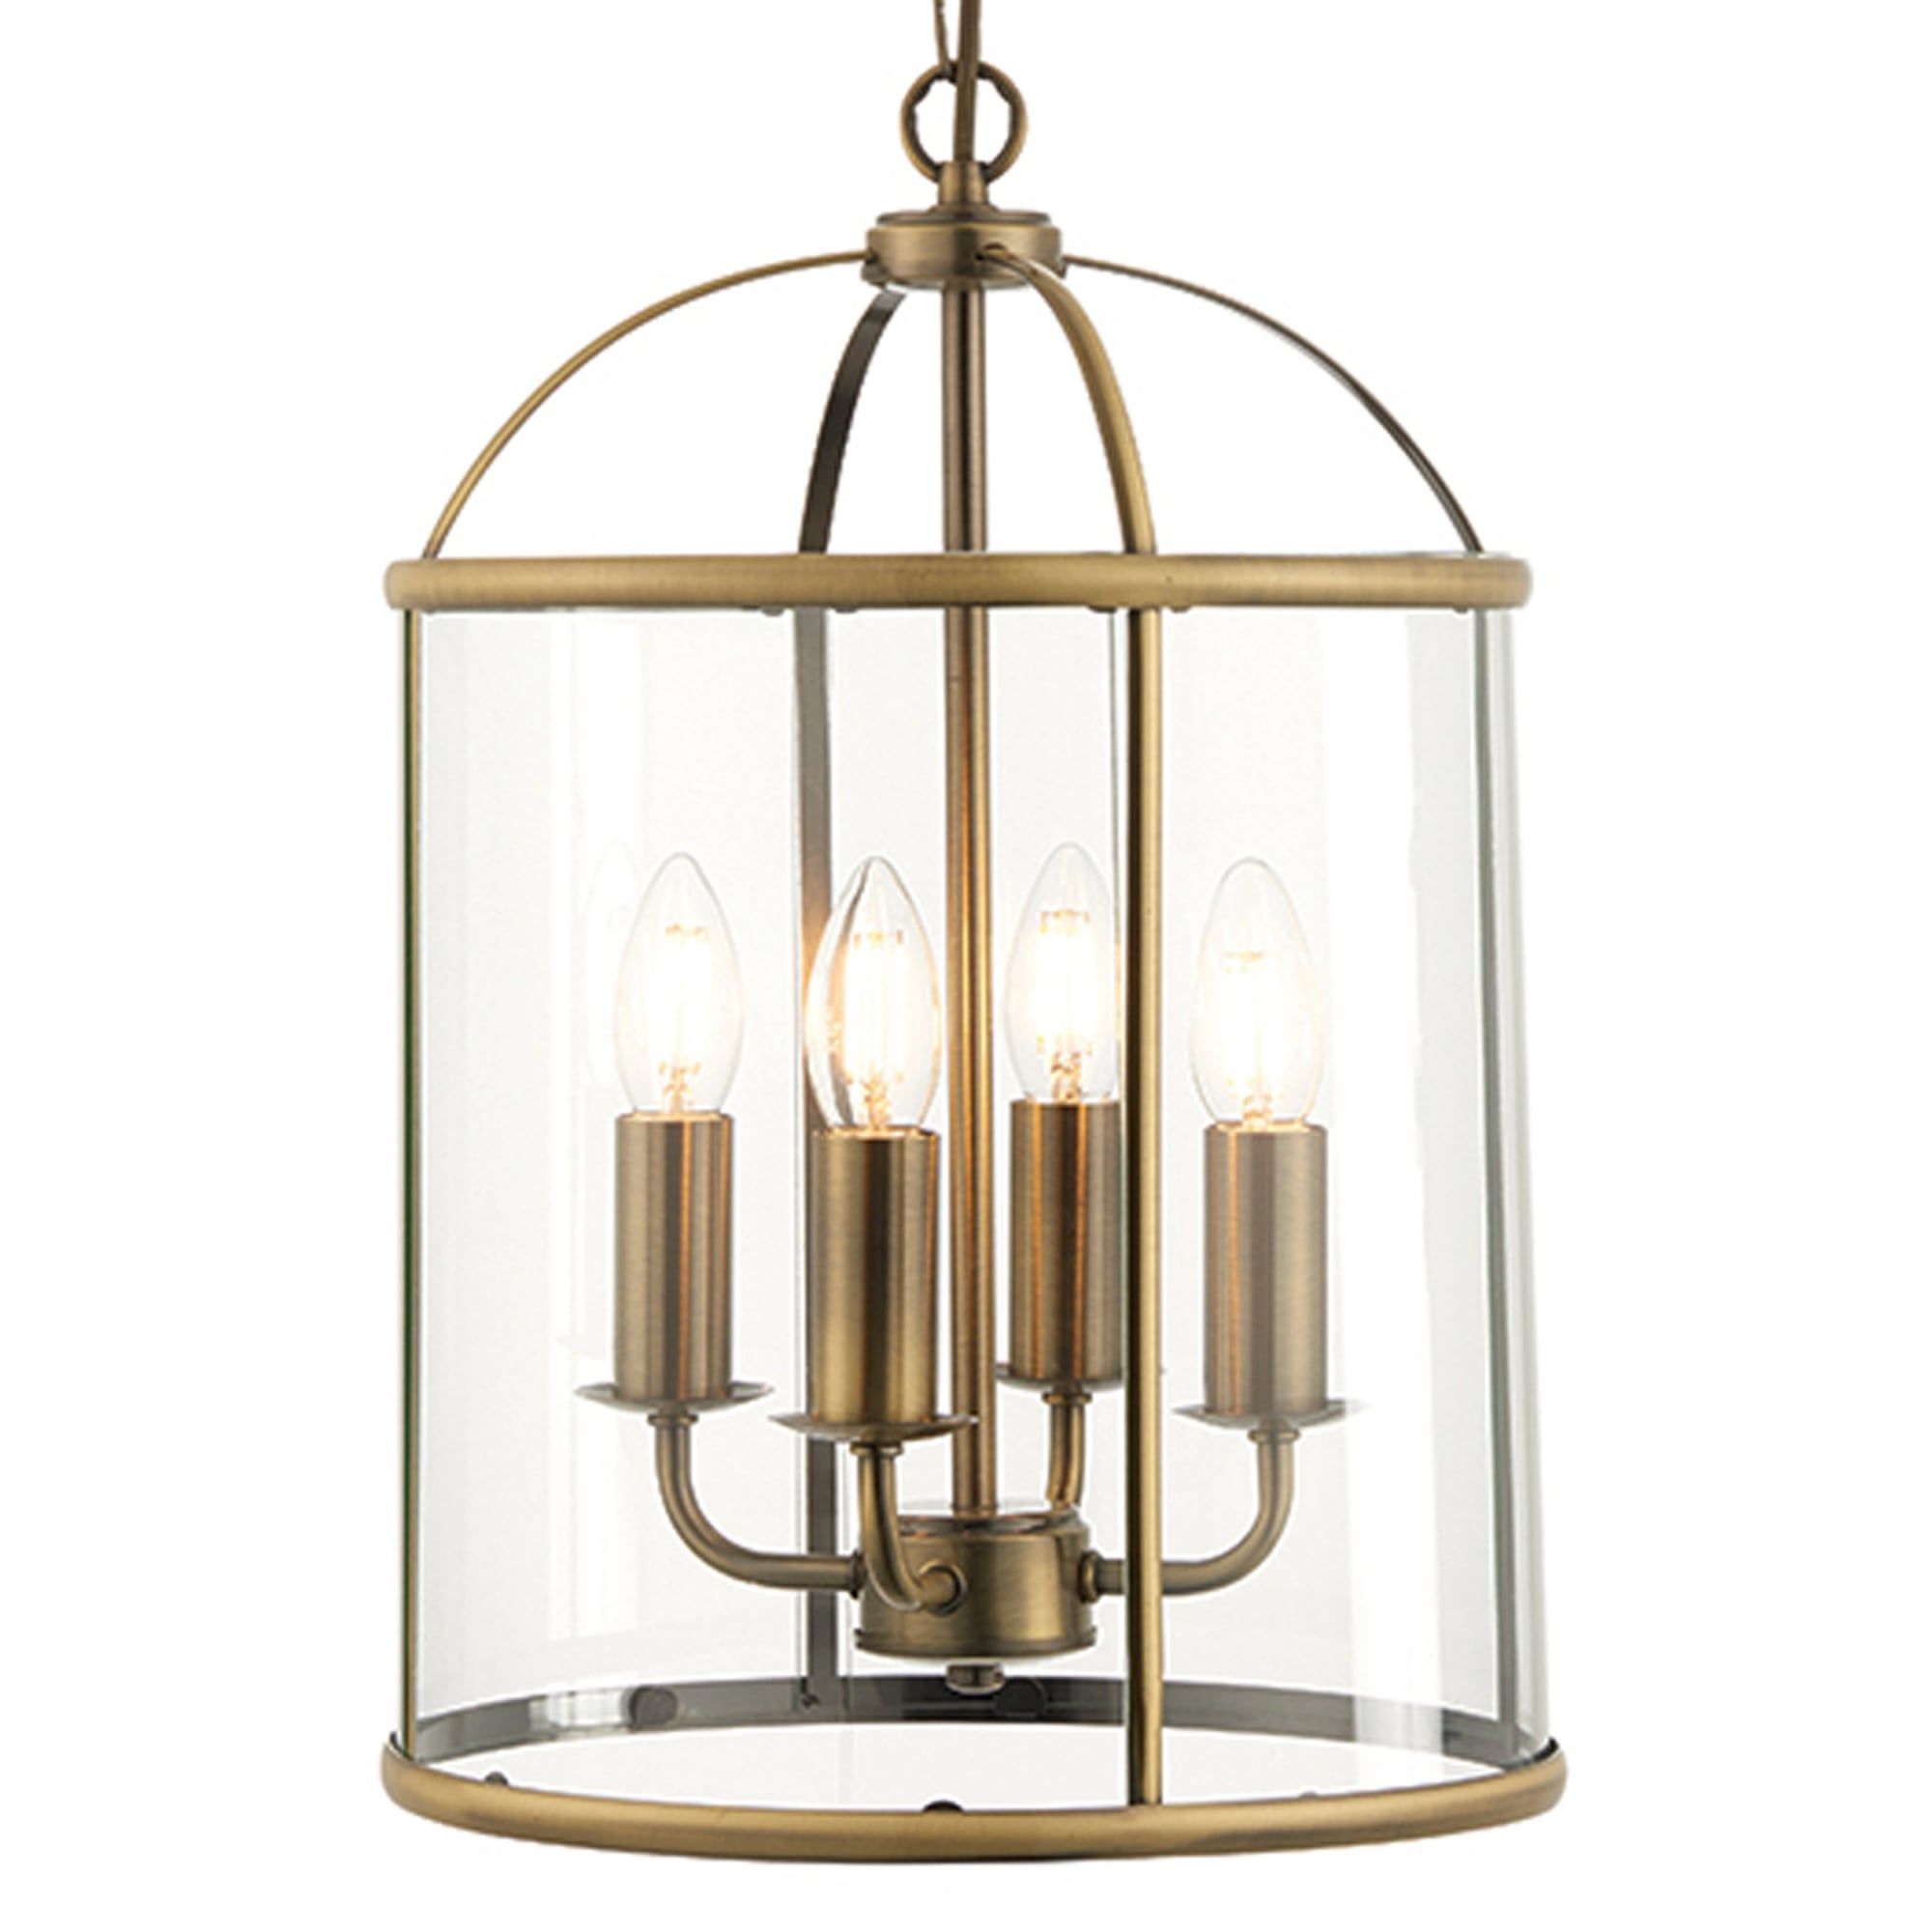 Most Popular Aged Brass Lantern Chandeliers Pertaining To Endon 69455 Lambeth 4 Light Antique Brass And Glass Lantern Pendant (View 9 of 10)